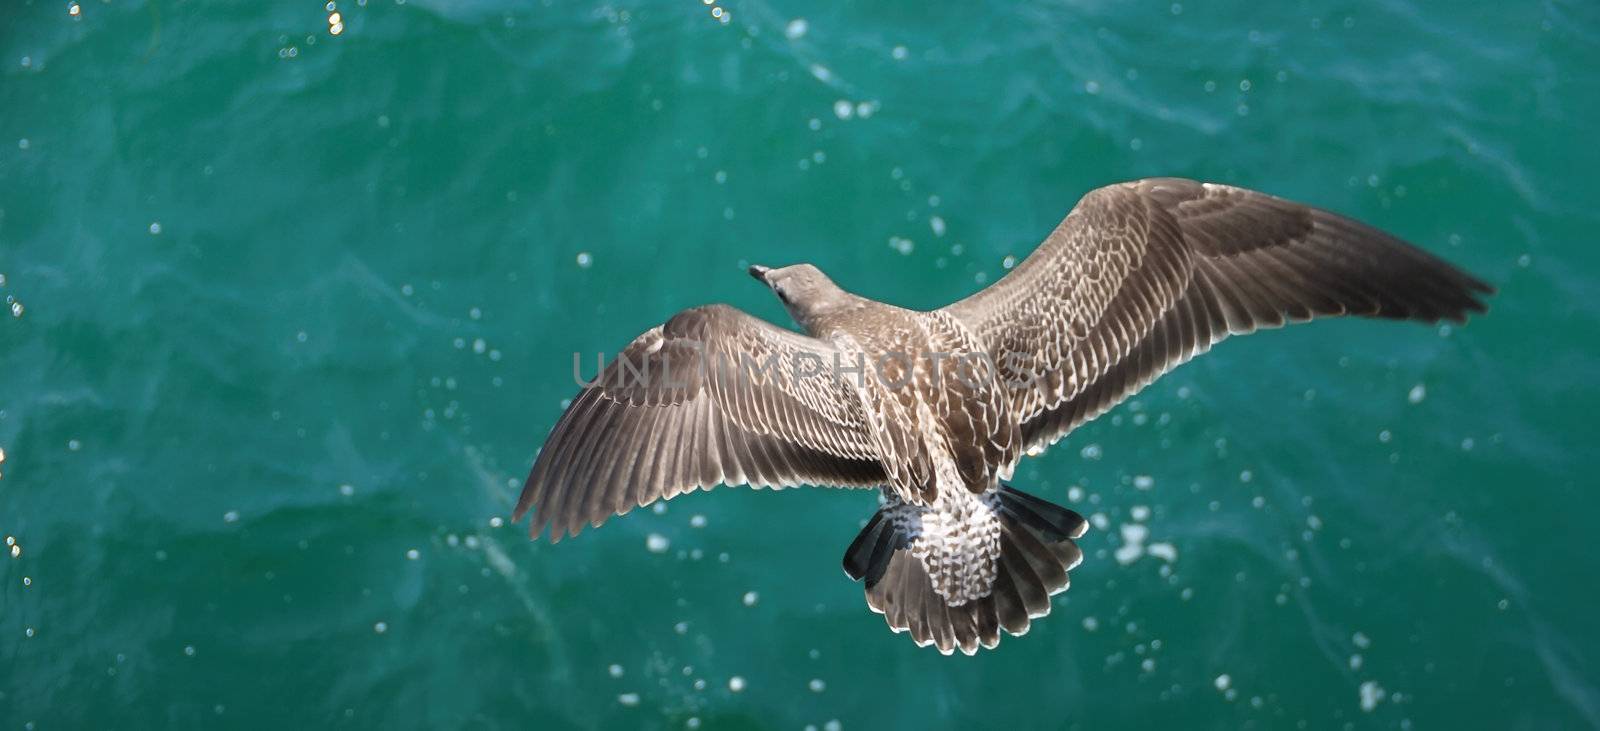 A brown seagull flying above the green ocean water.